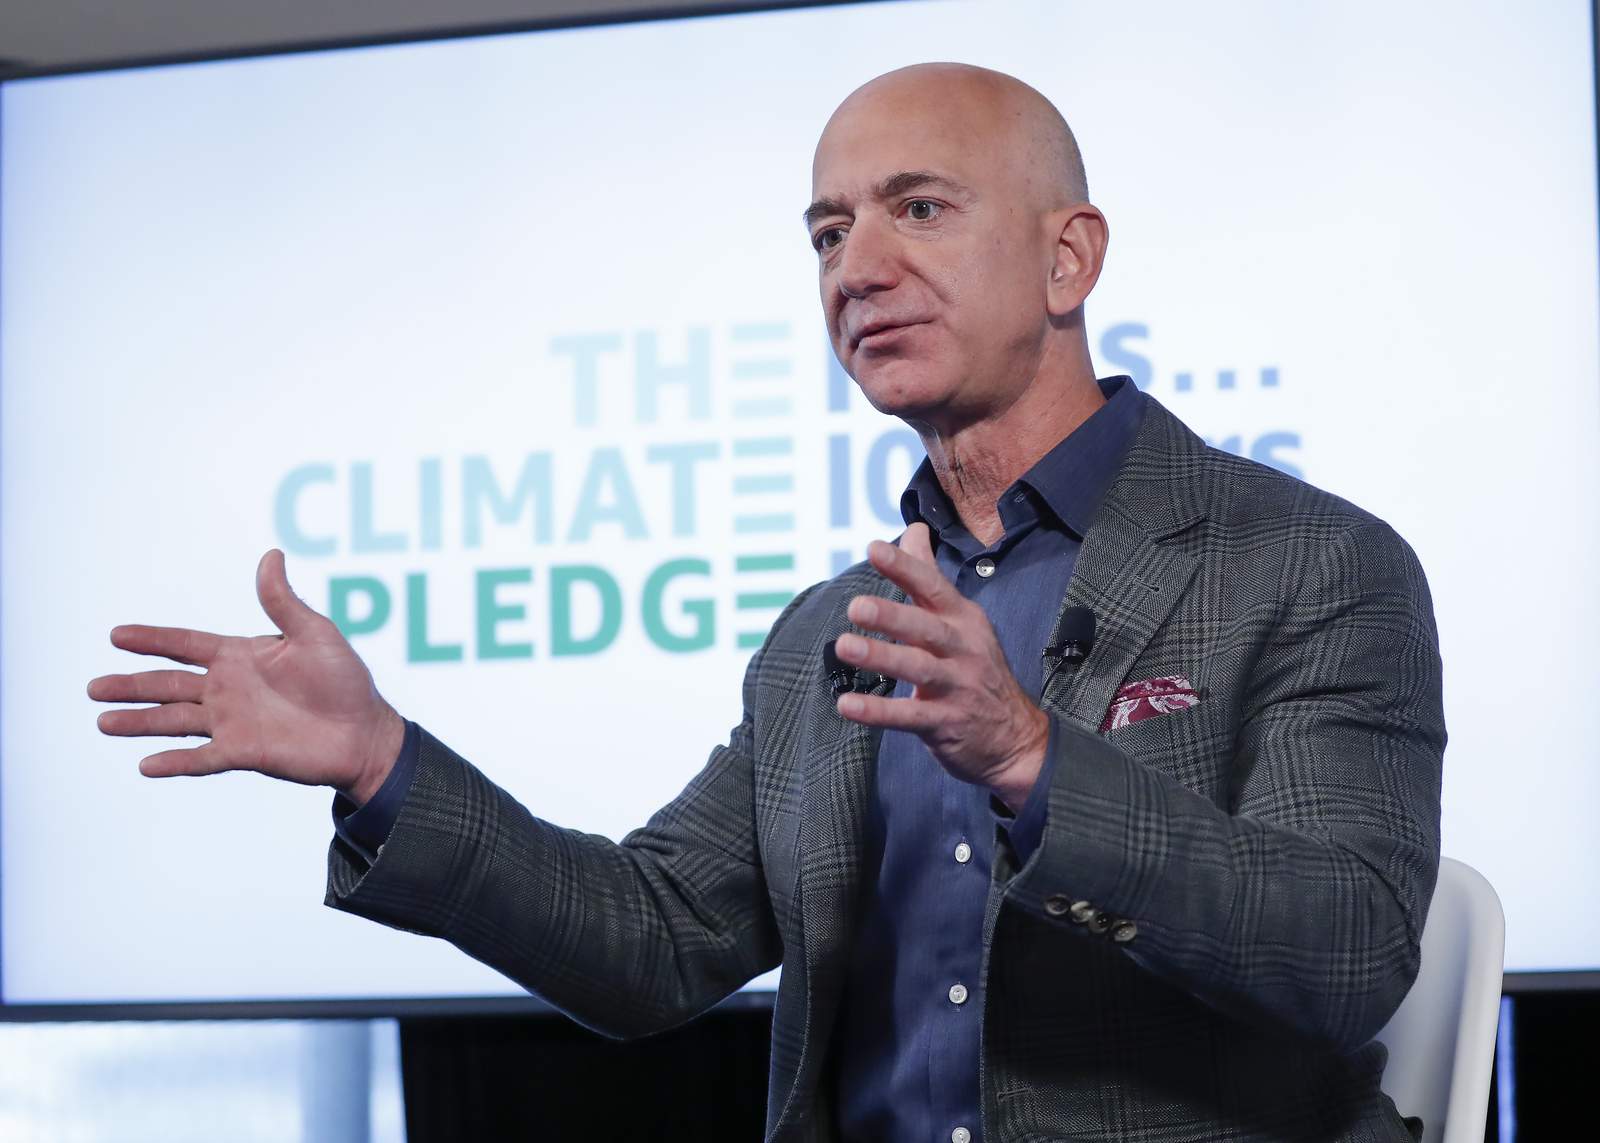 Amazon's Bezos tops list of richest charitable gifts in 2020